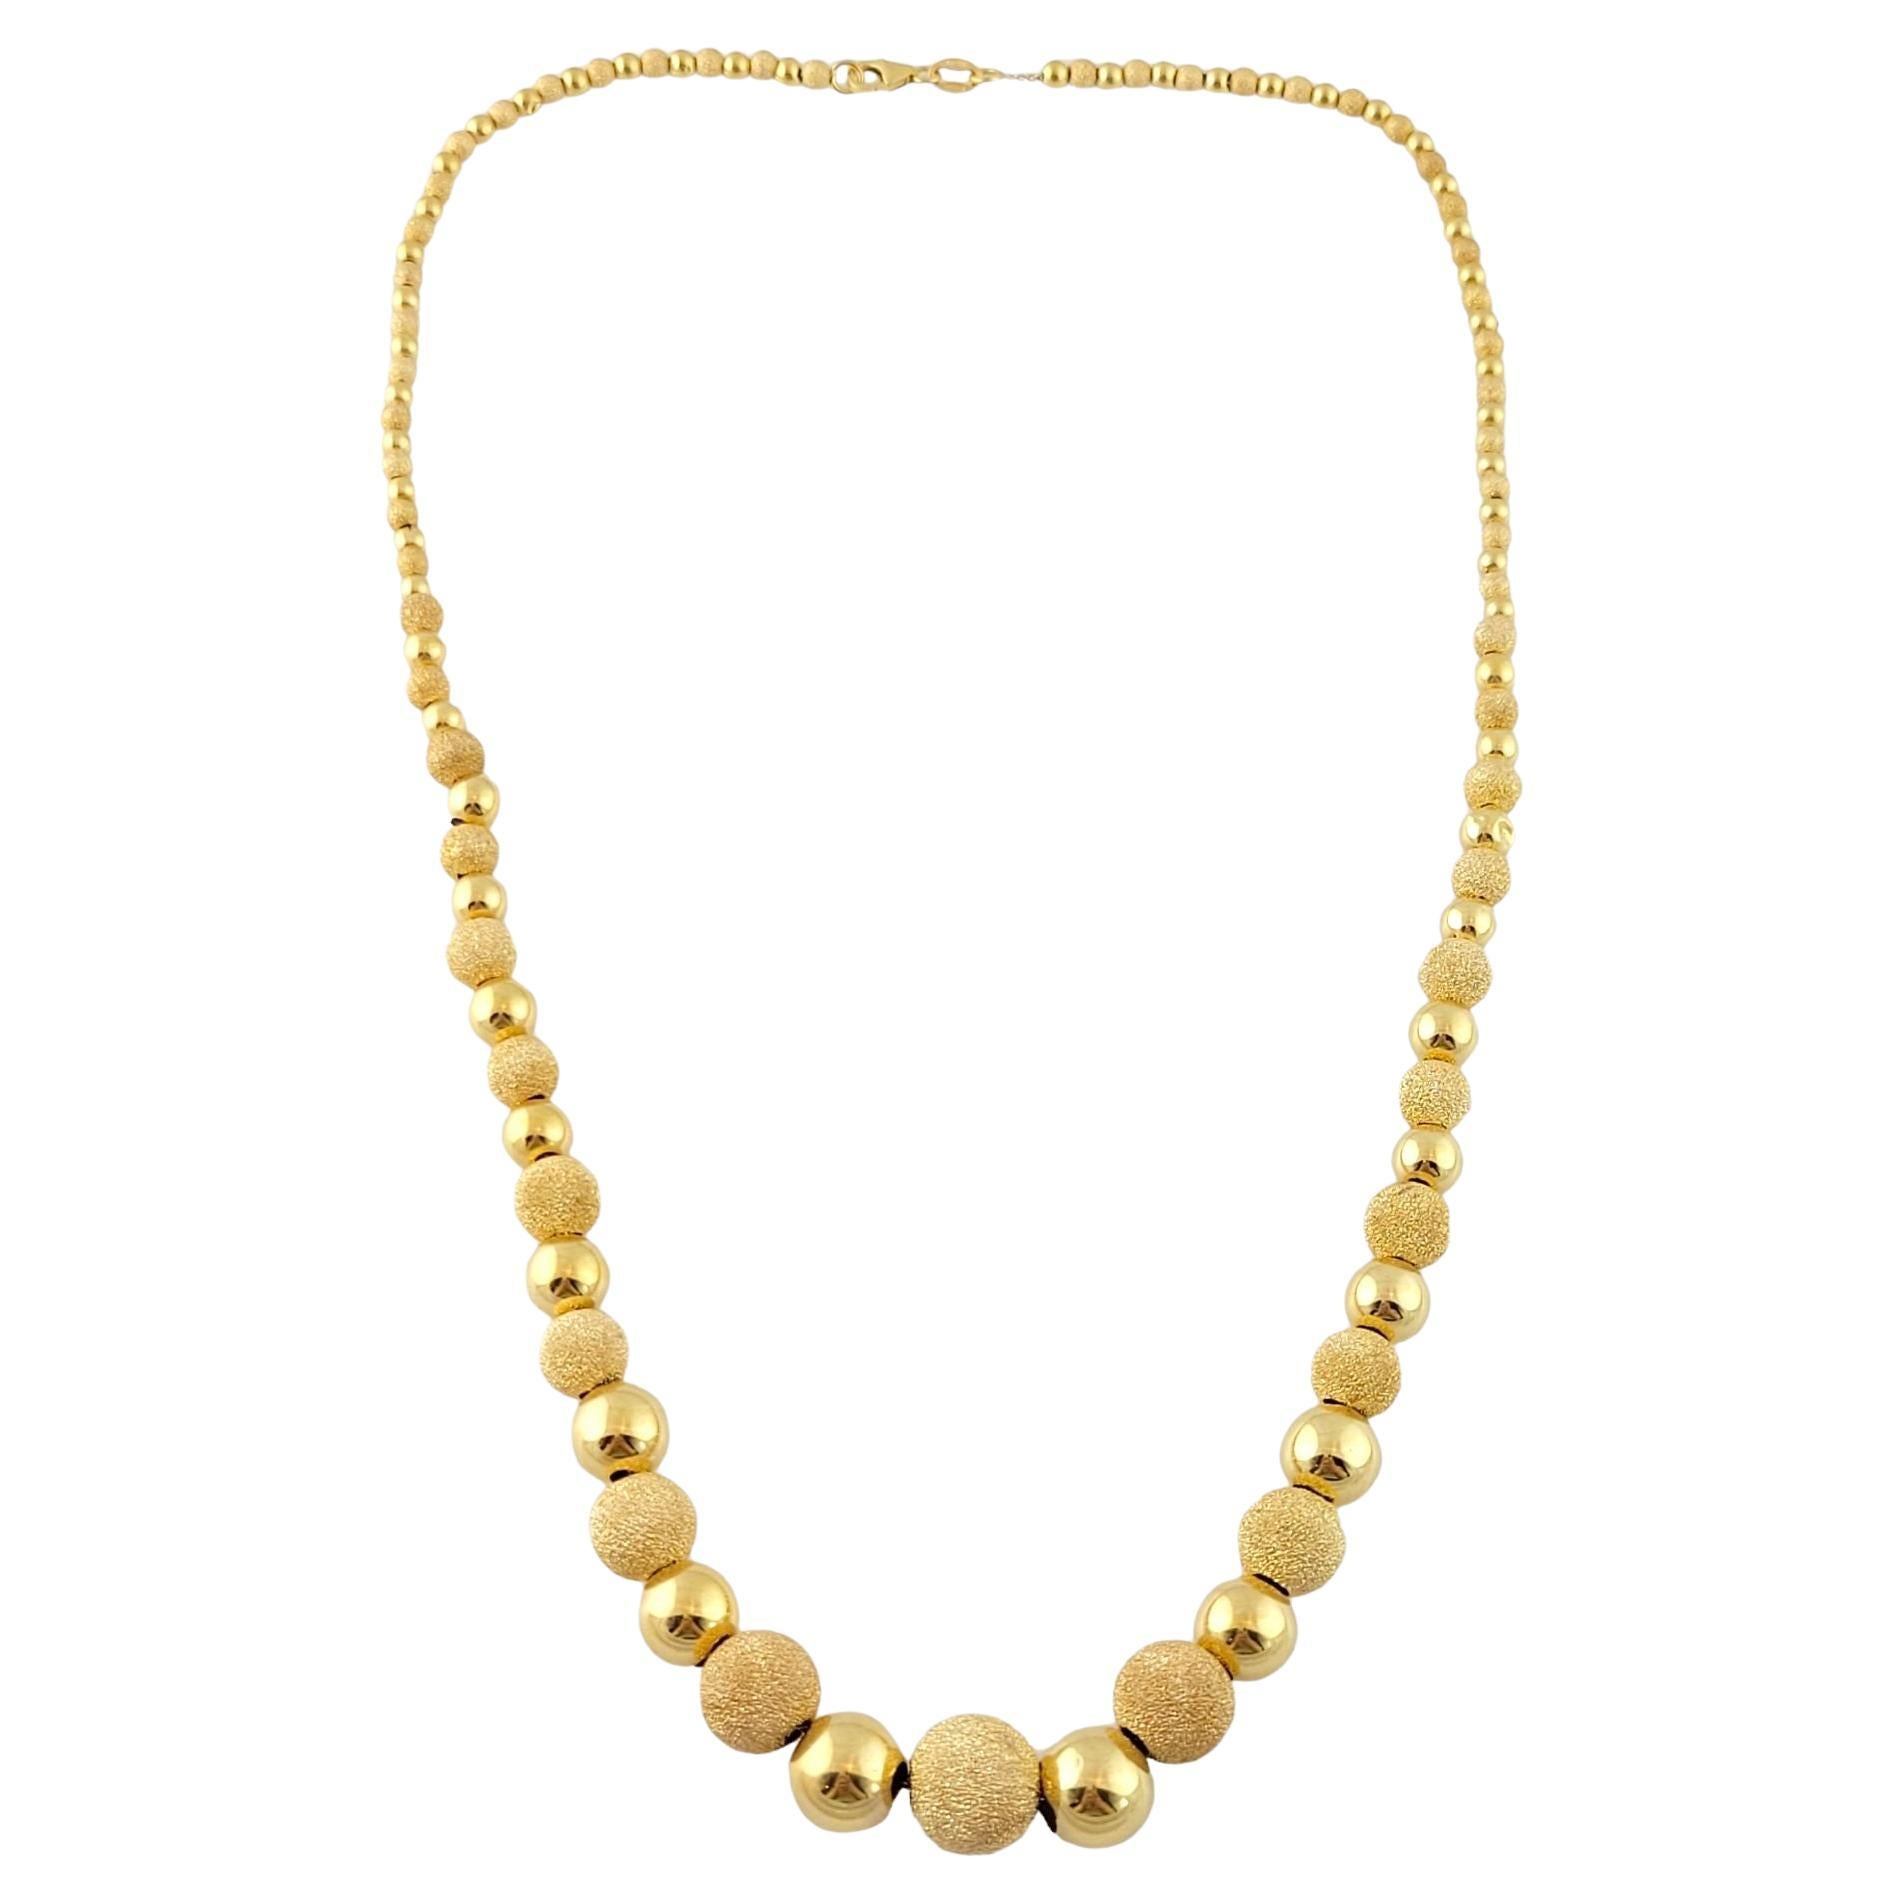 14K Yellow Gold Textured Graduated Ball Bead Necklace